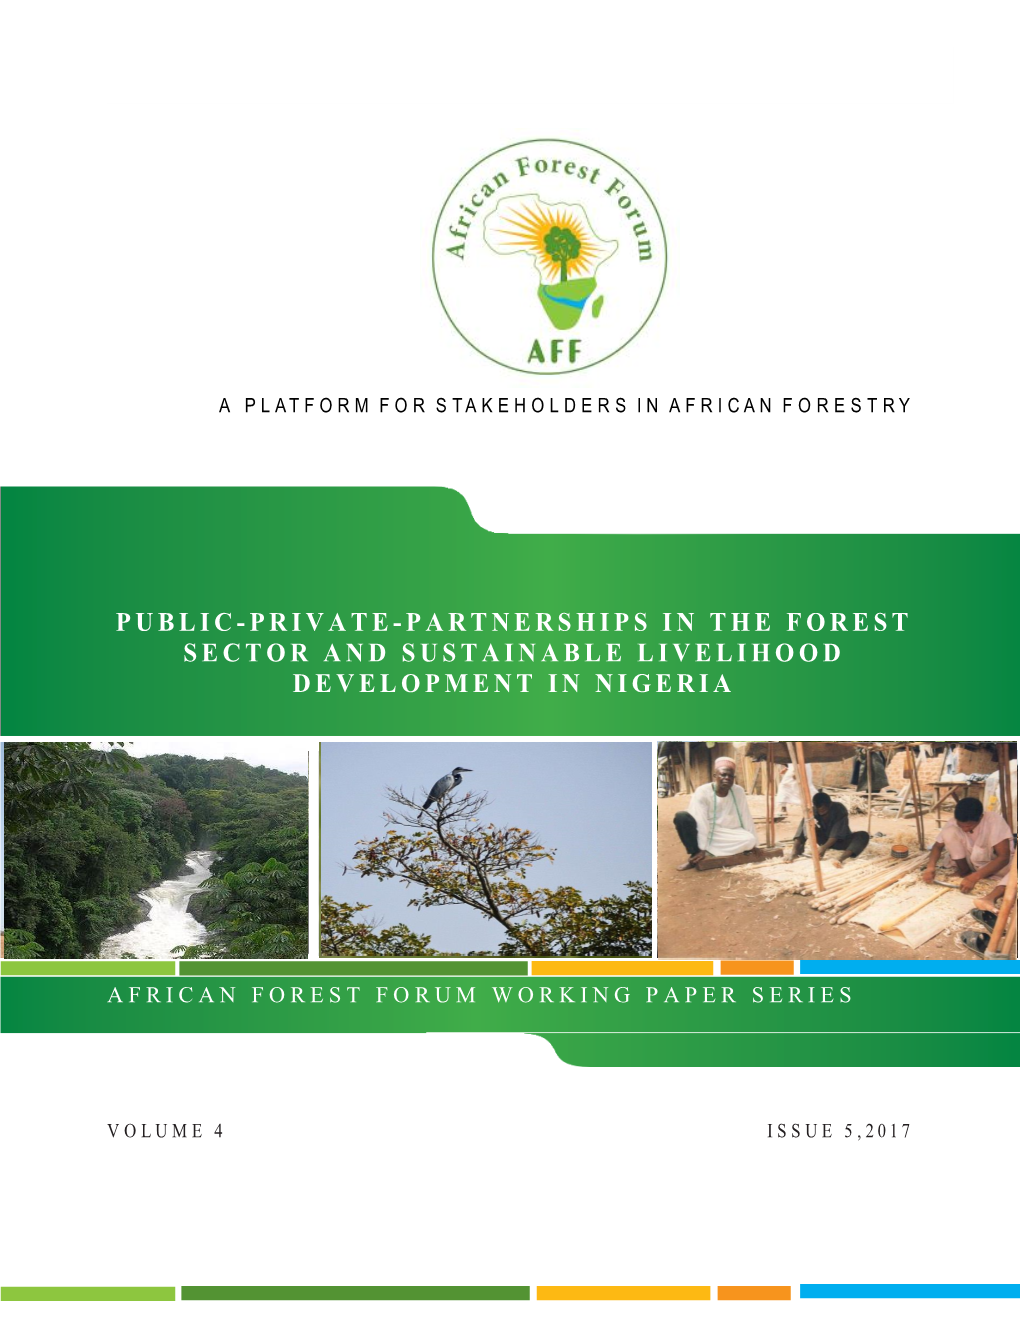 Public-Private-Partnerships in the Forest Sector and Sustainable Livelihood Development in Nigeria: African Forest Forum Working Paper, Vol (4) 5, Nairobi